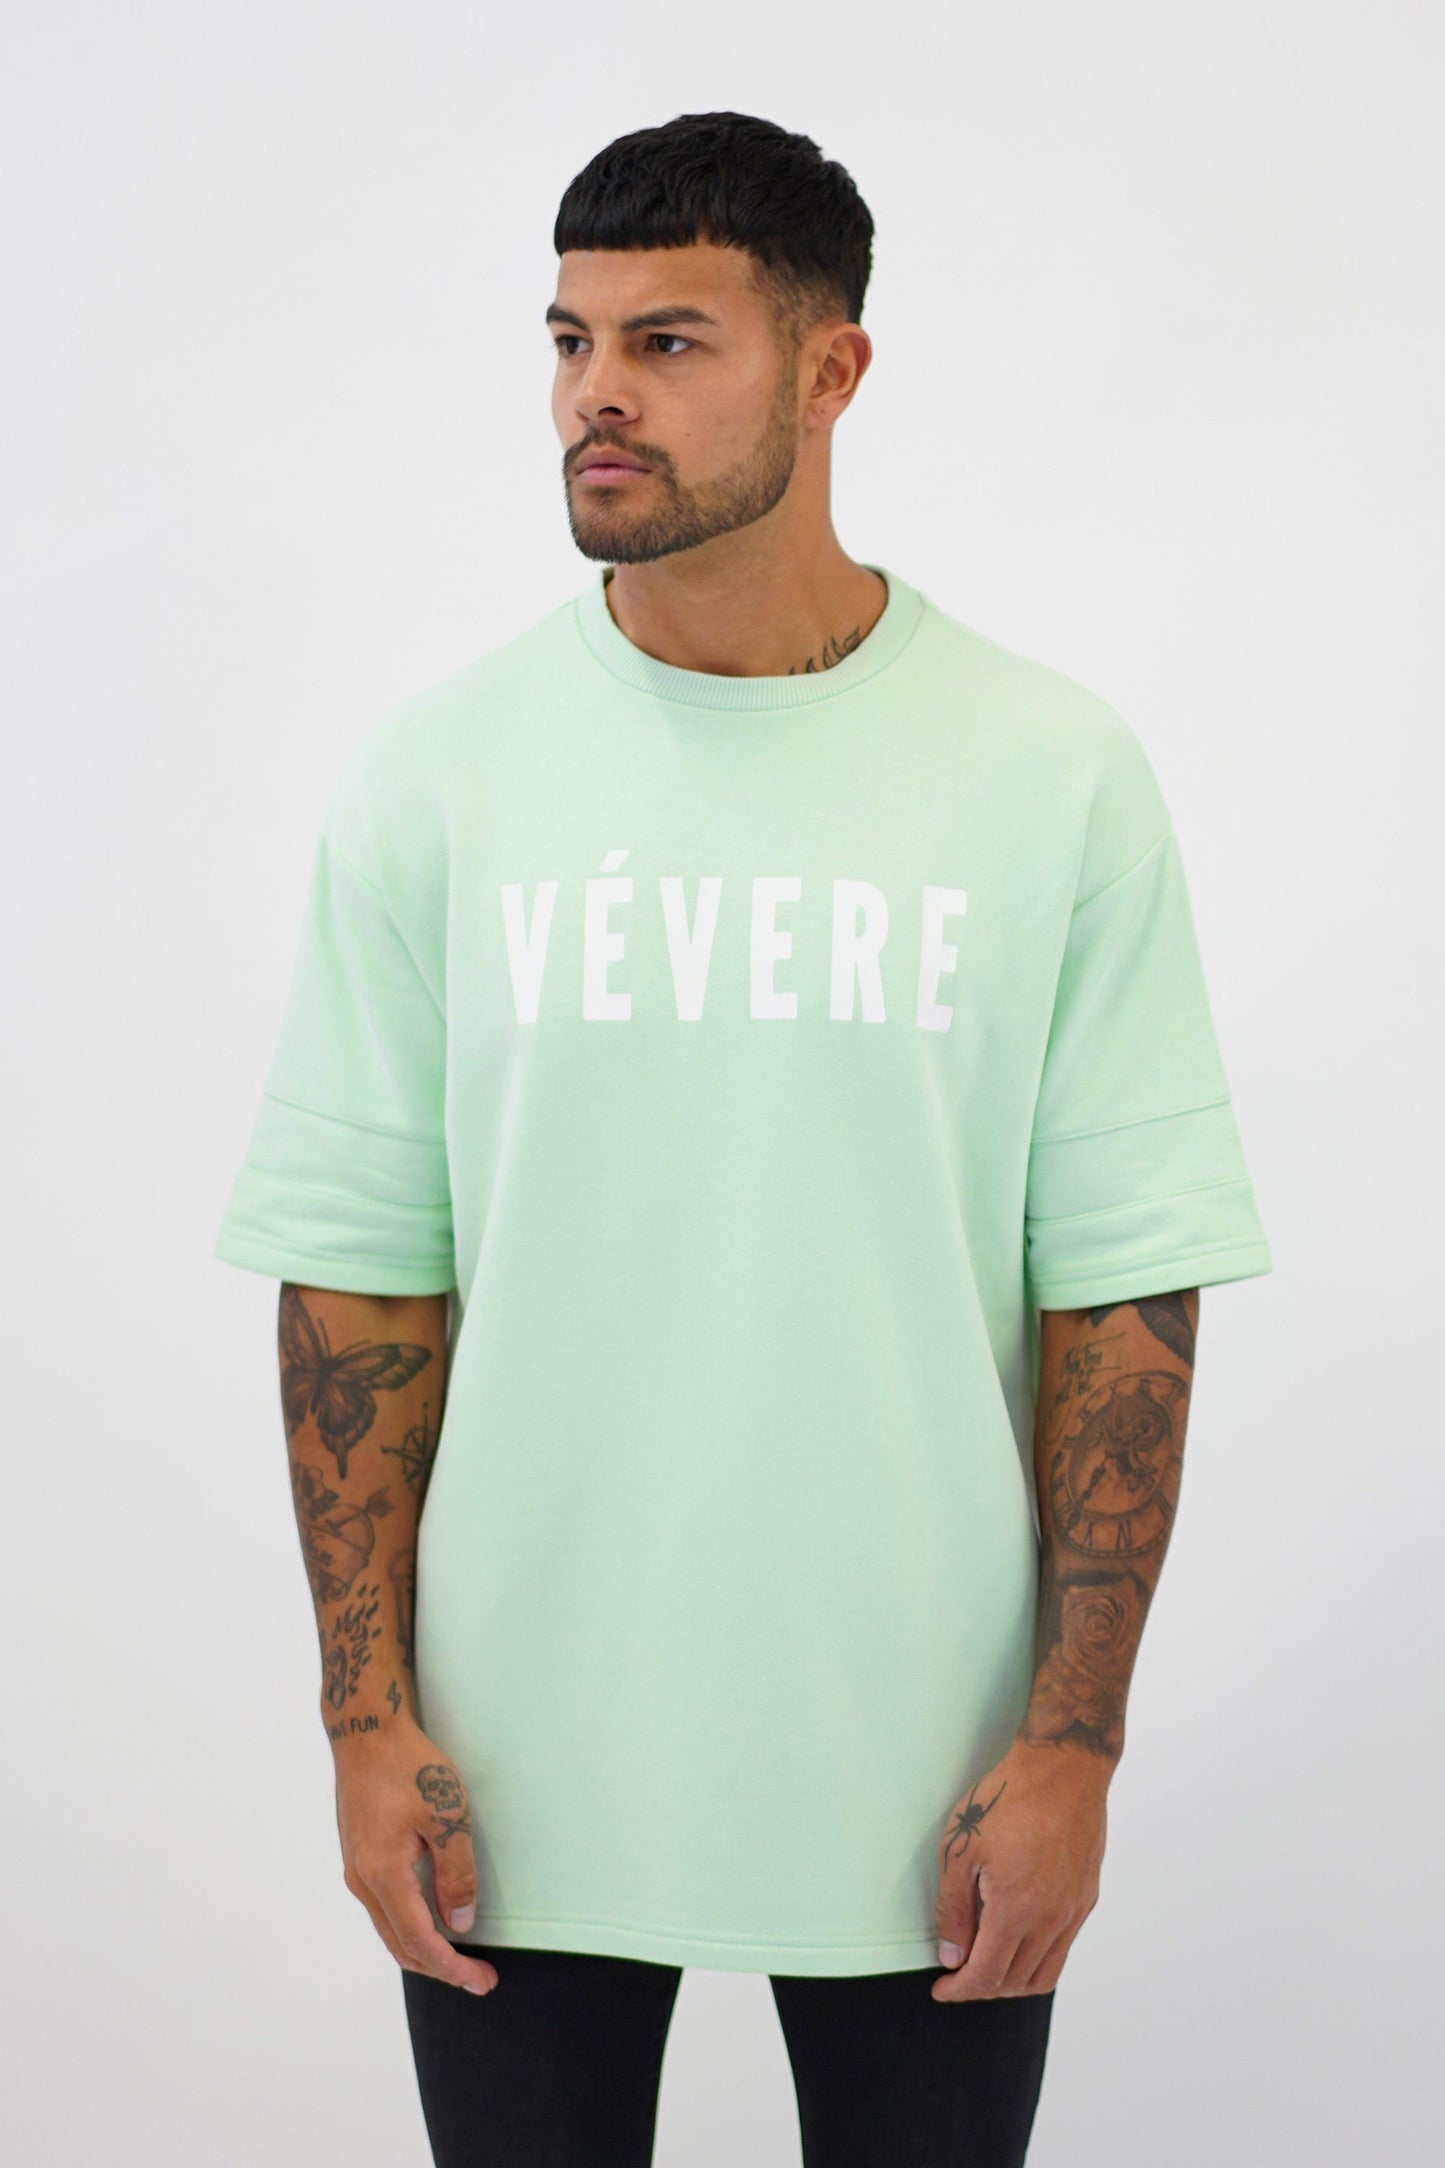 Pastel Green Oversized T-Shirt front - Vevere